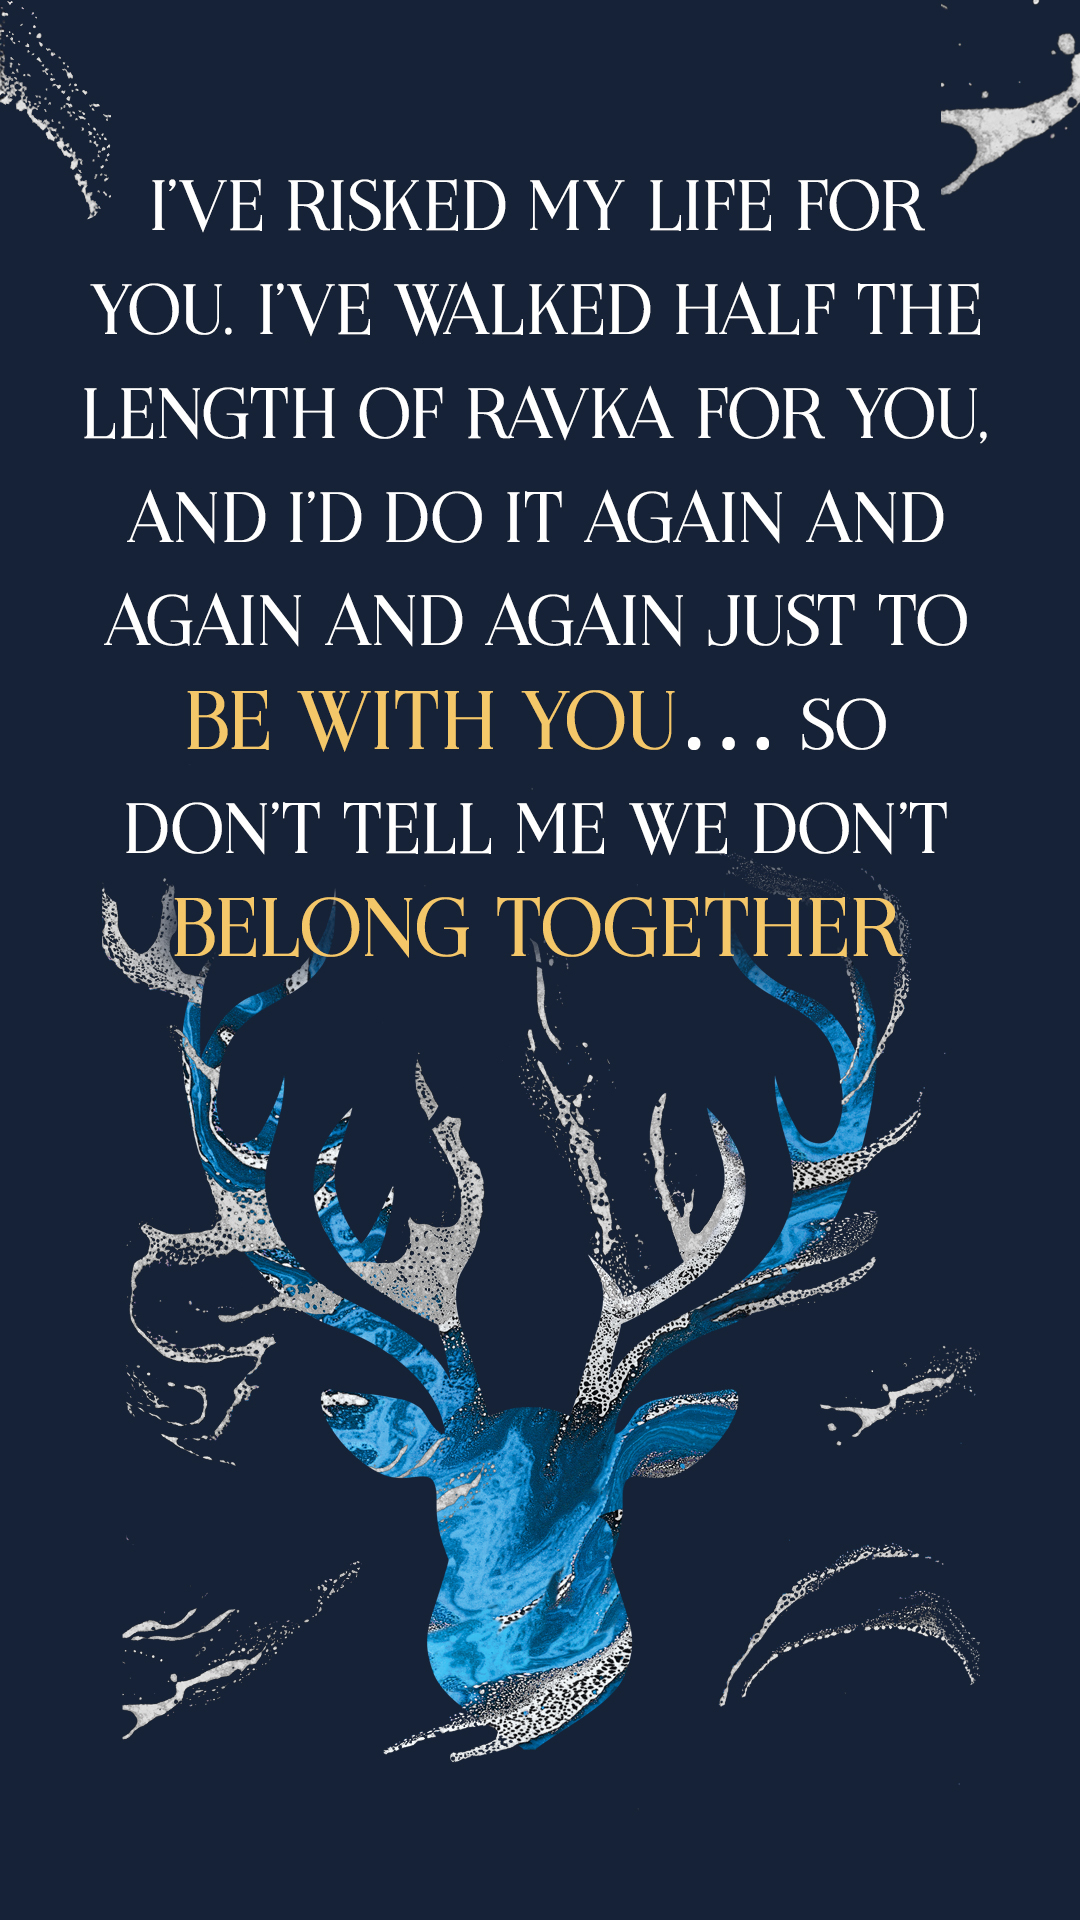 An artistic image featuring a silhouette of a deer with antlers that transform into two human figures. the background is blue with white text expressing a heartfelt message about belonging together.